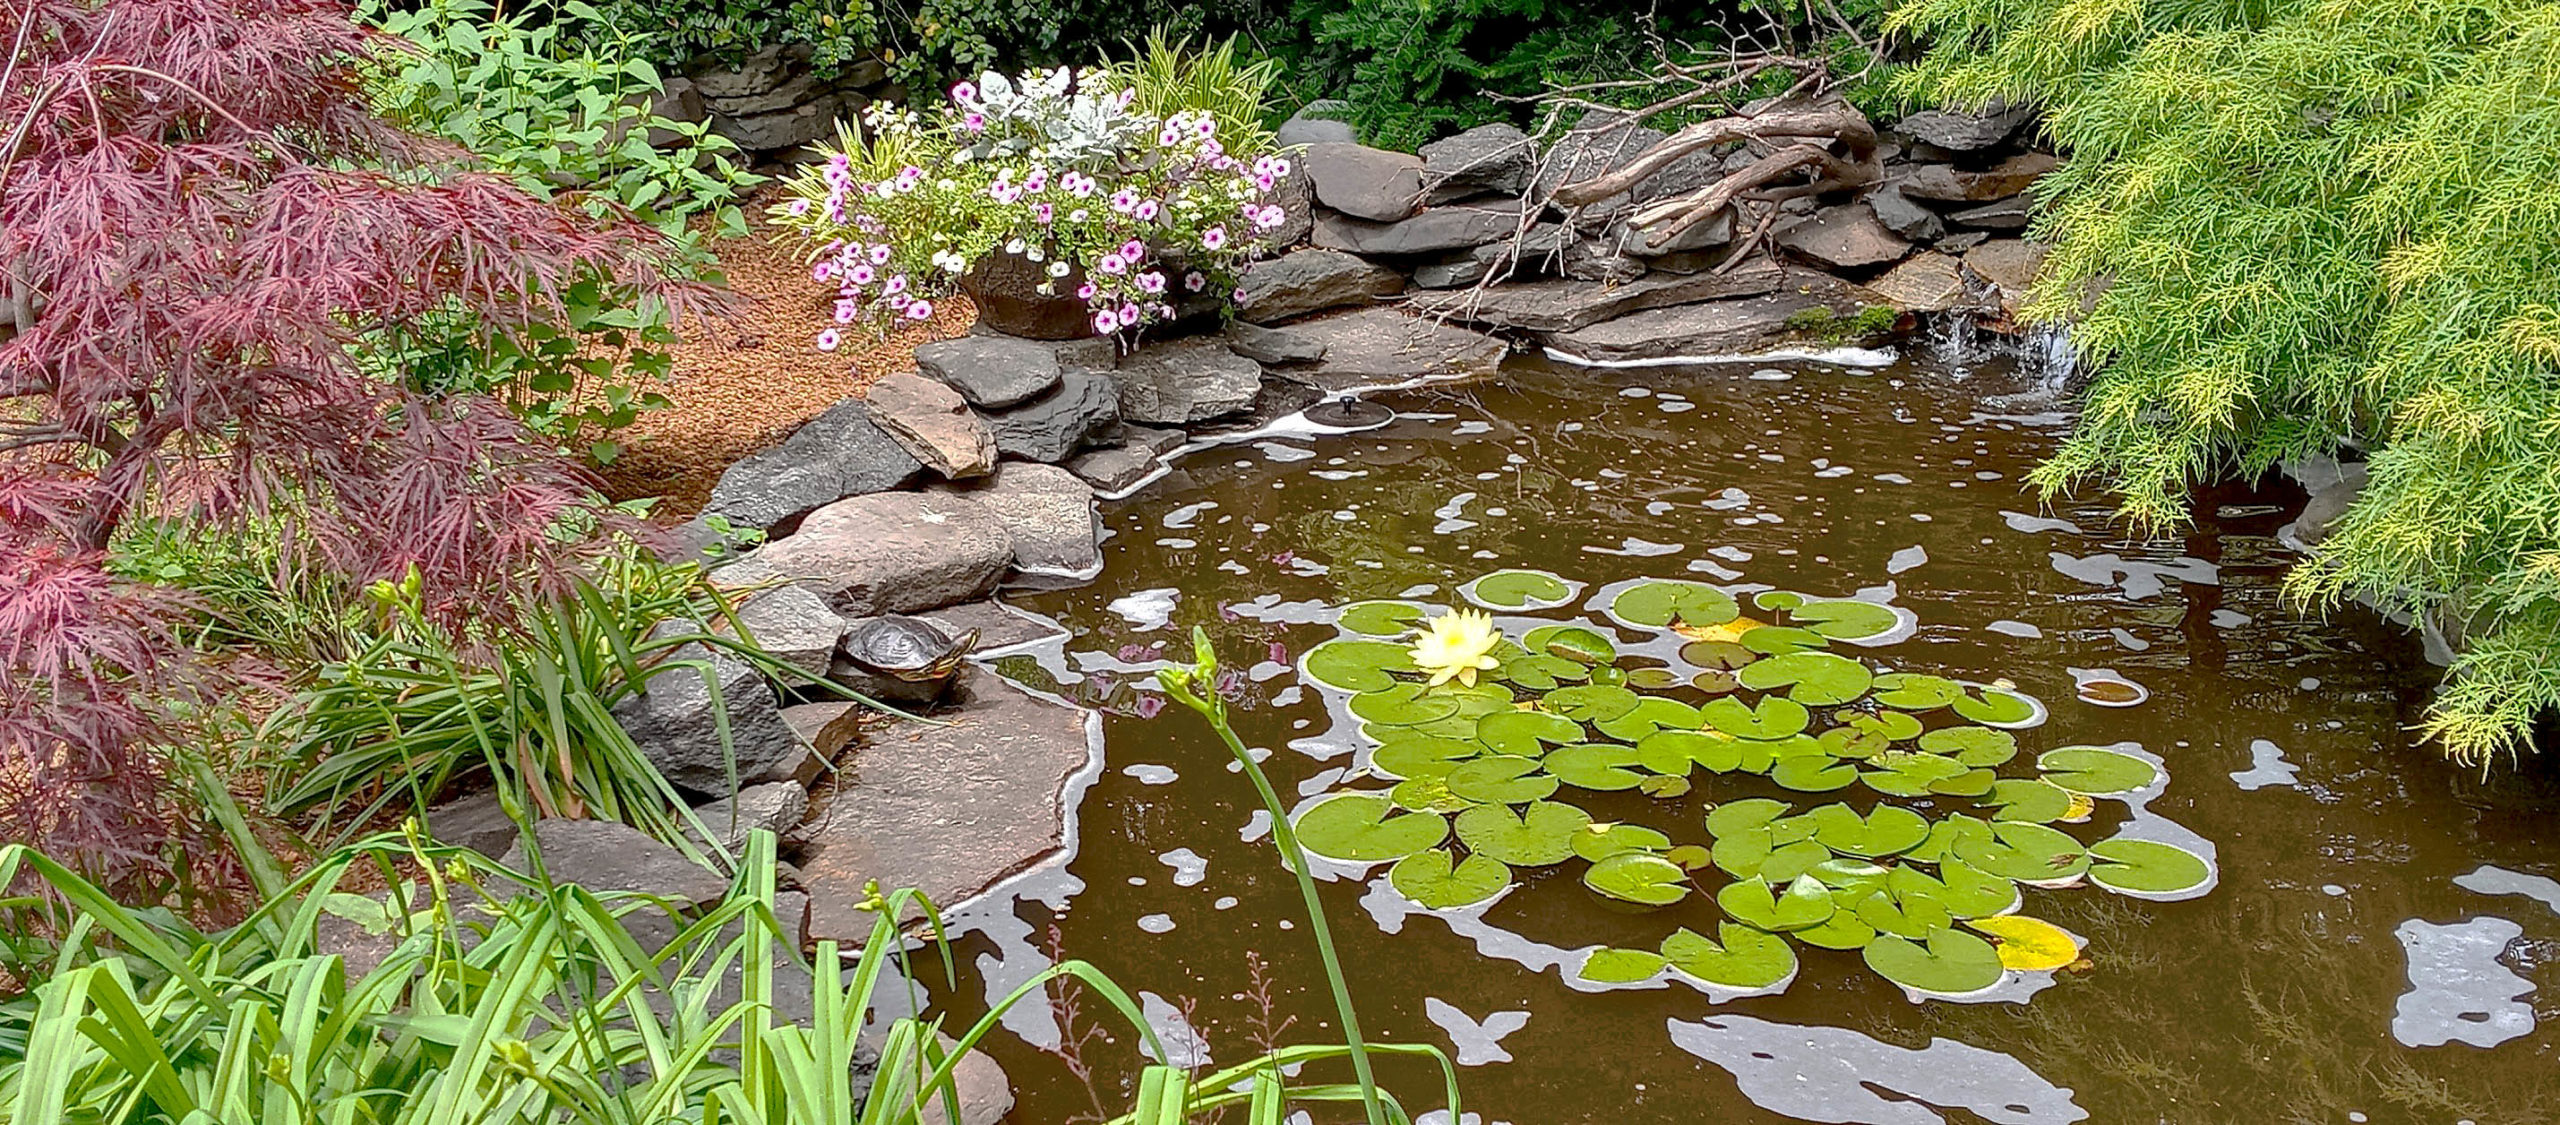 Pond with lily pads and a turtle